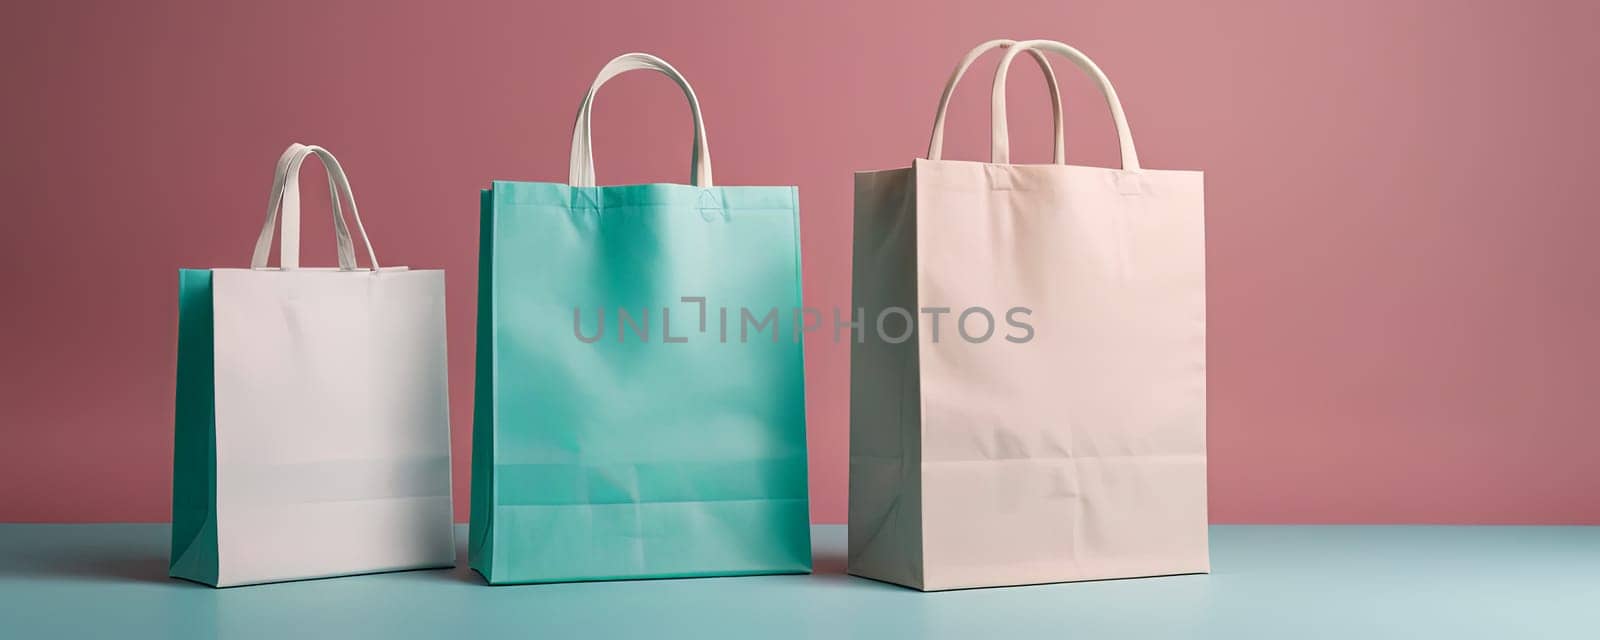 Shopping bag on backdrop with studio lighting, shopping advertisement and product placement